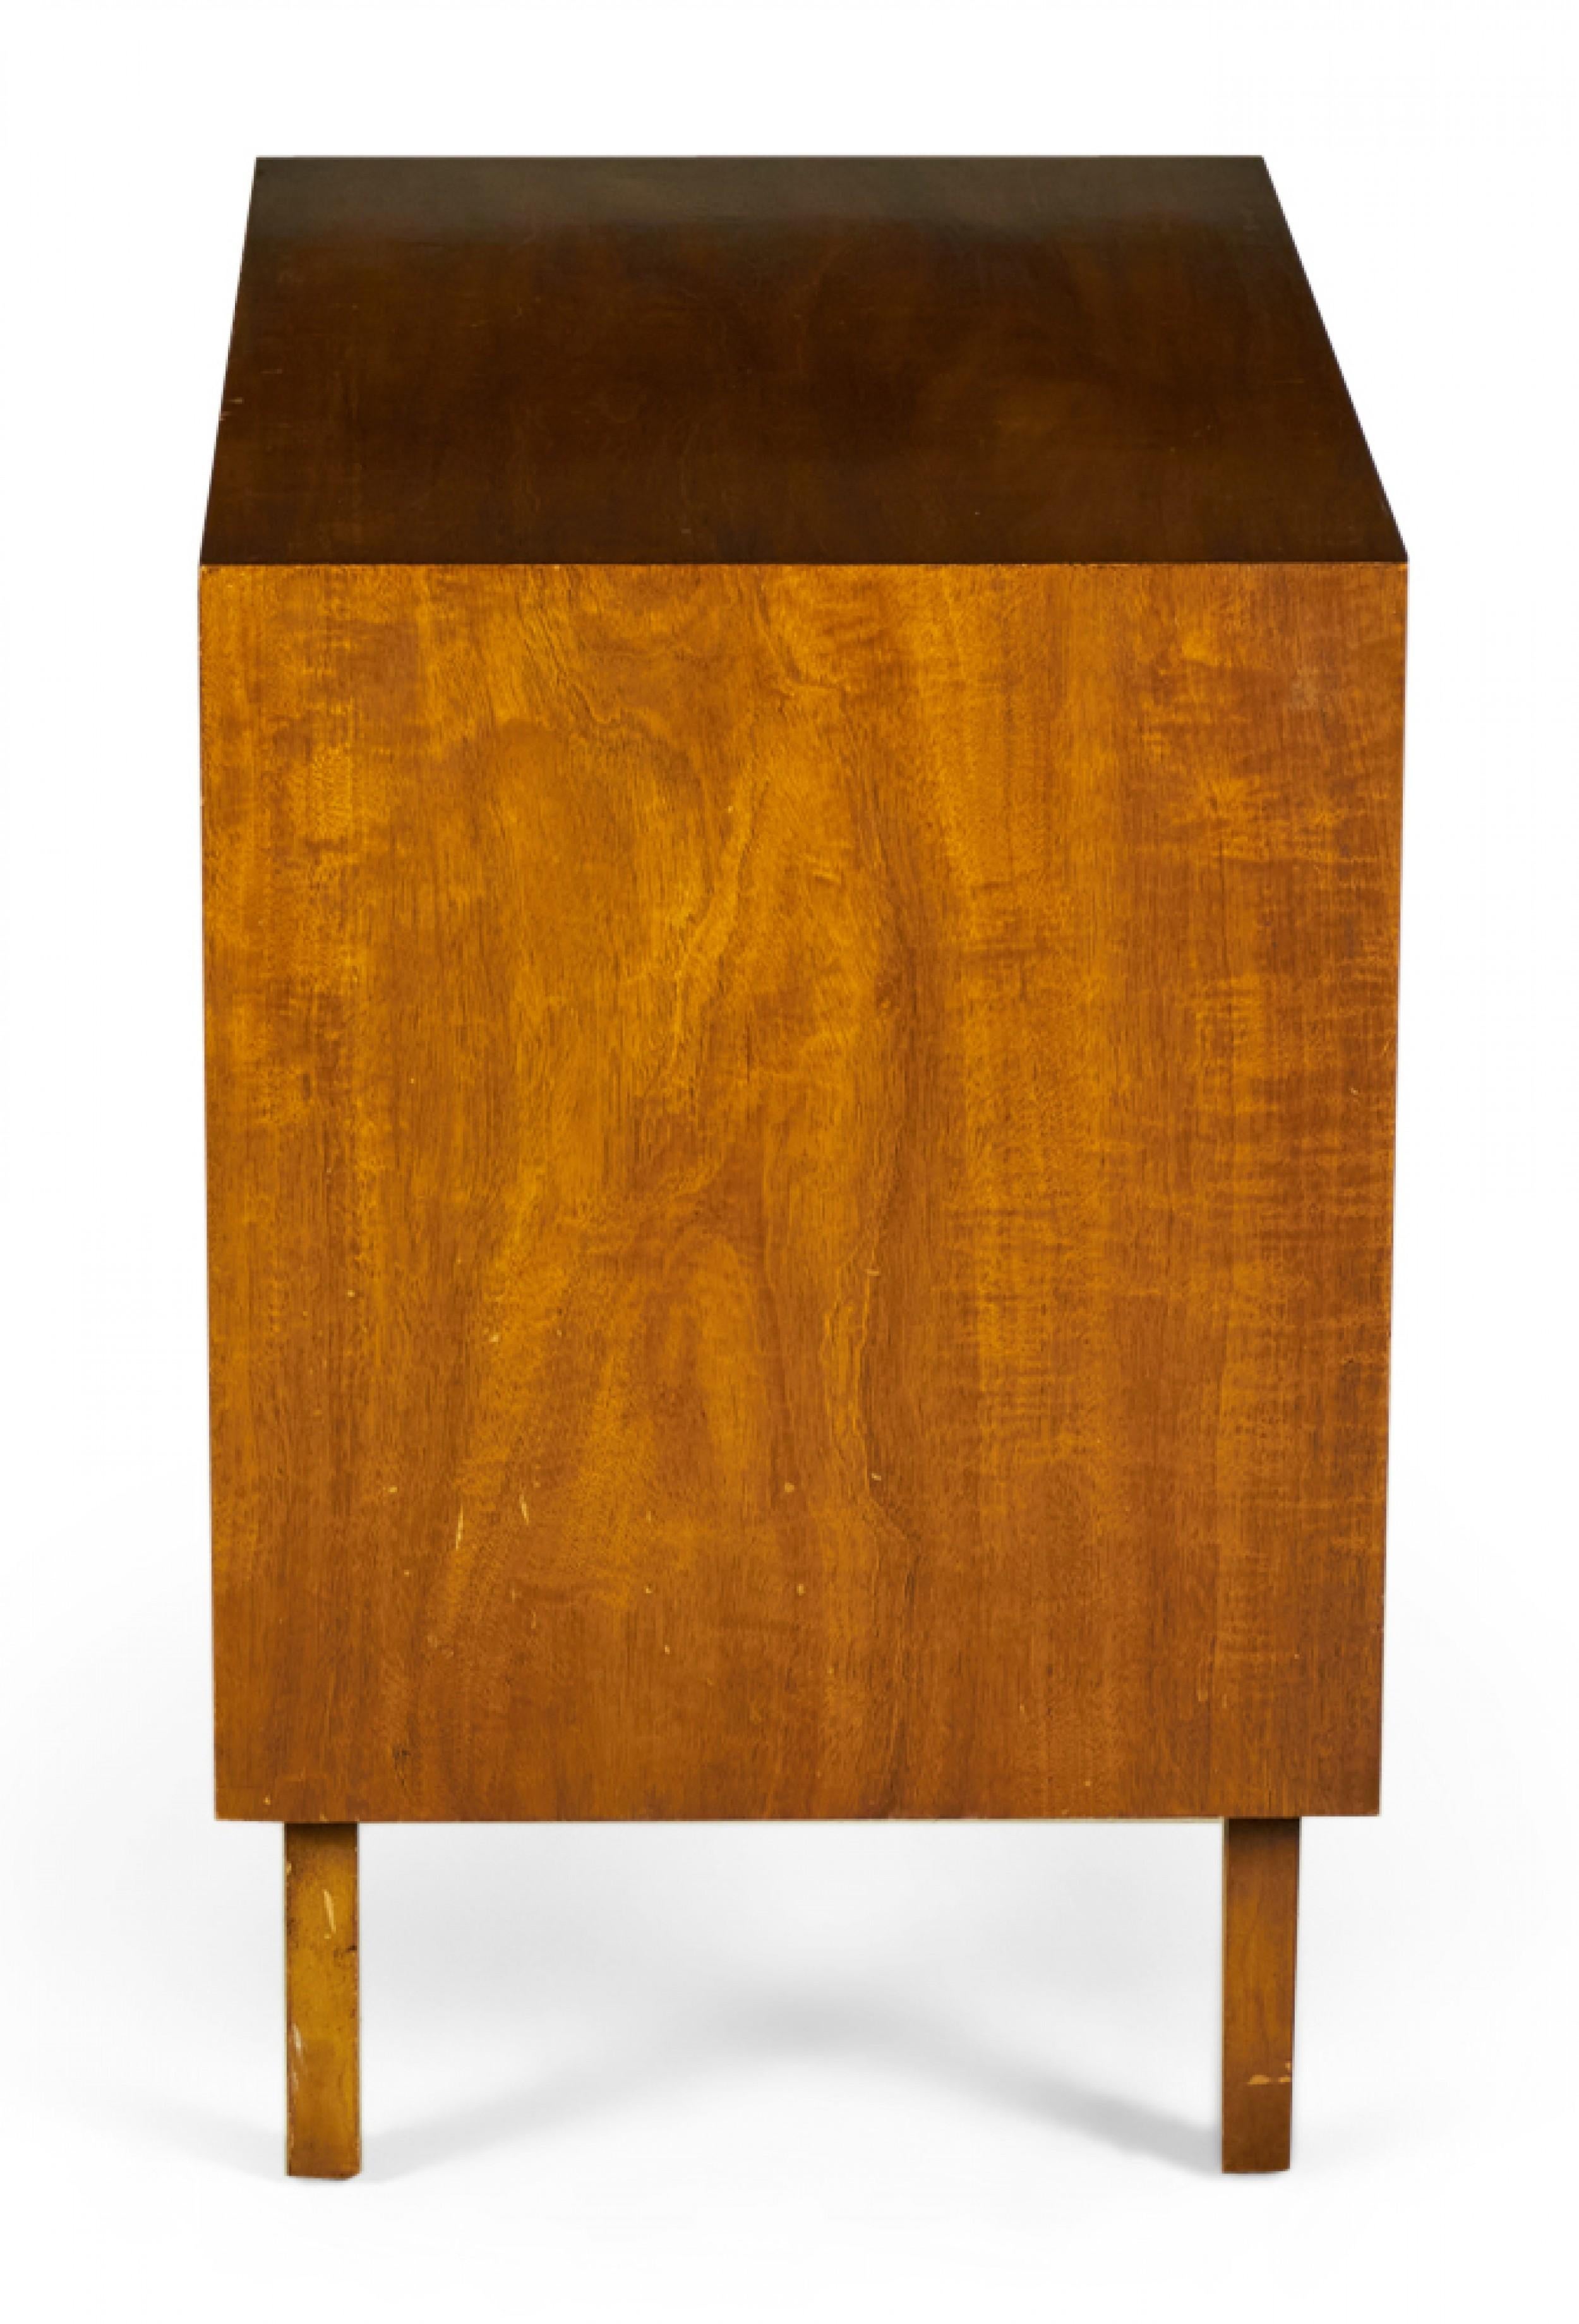 2 American mid-century walnut bedside tables / end tables with a single drawer to the right of an open compartment over a mirrored base arrangement comprised of an open cabinet and a larger closed cabinet that opens to the left with a slat front